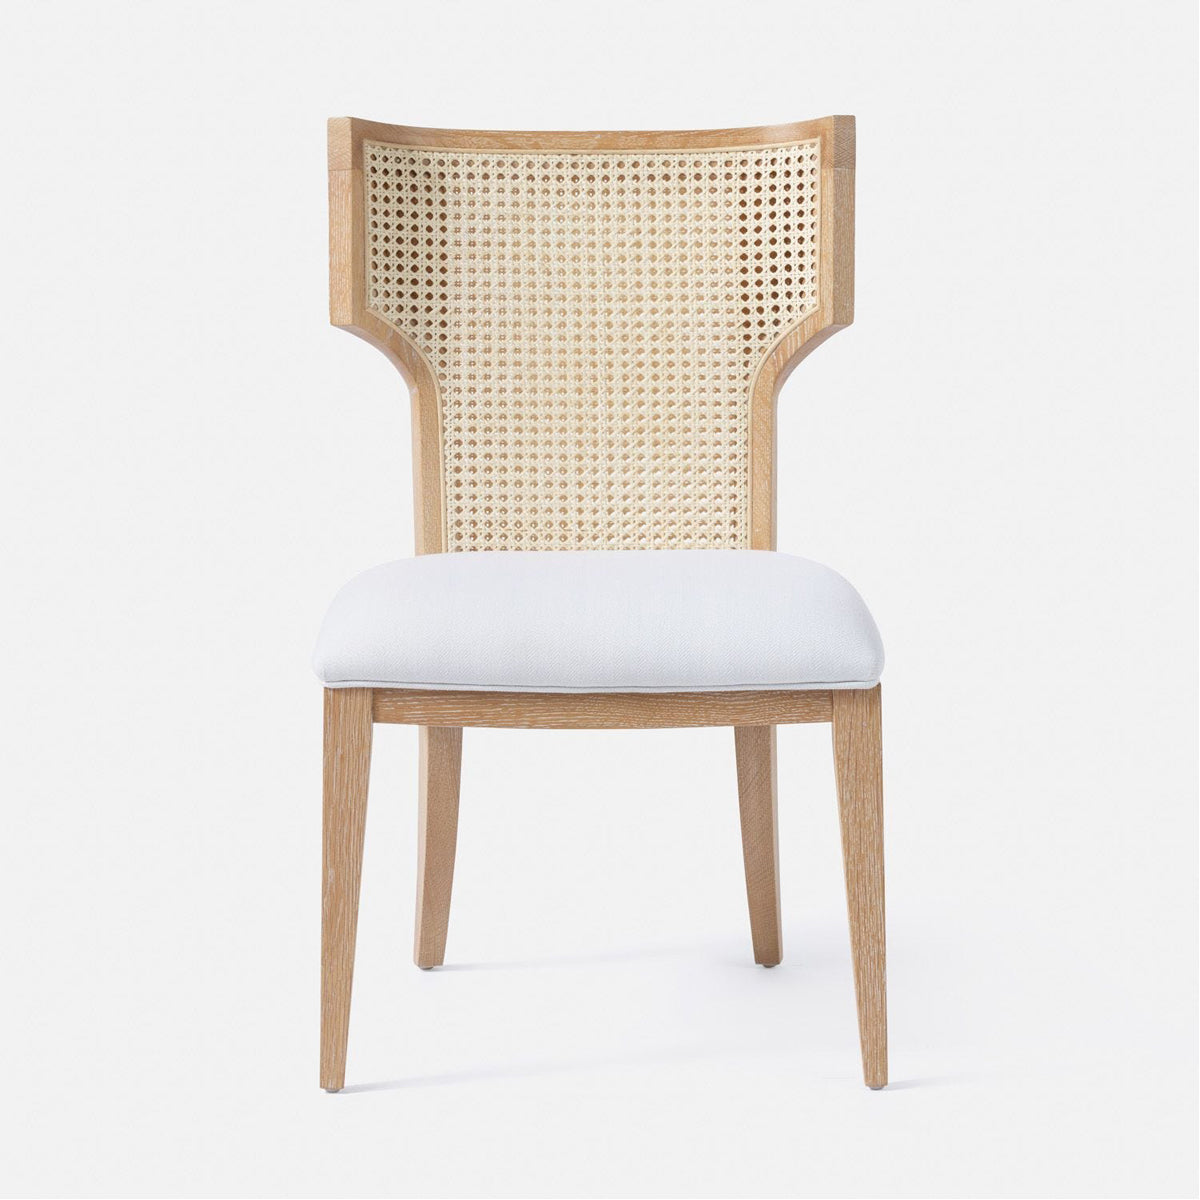 Made Goods Carleen Wingback Cane Dining Chair in Mondego Cotton Jute